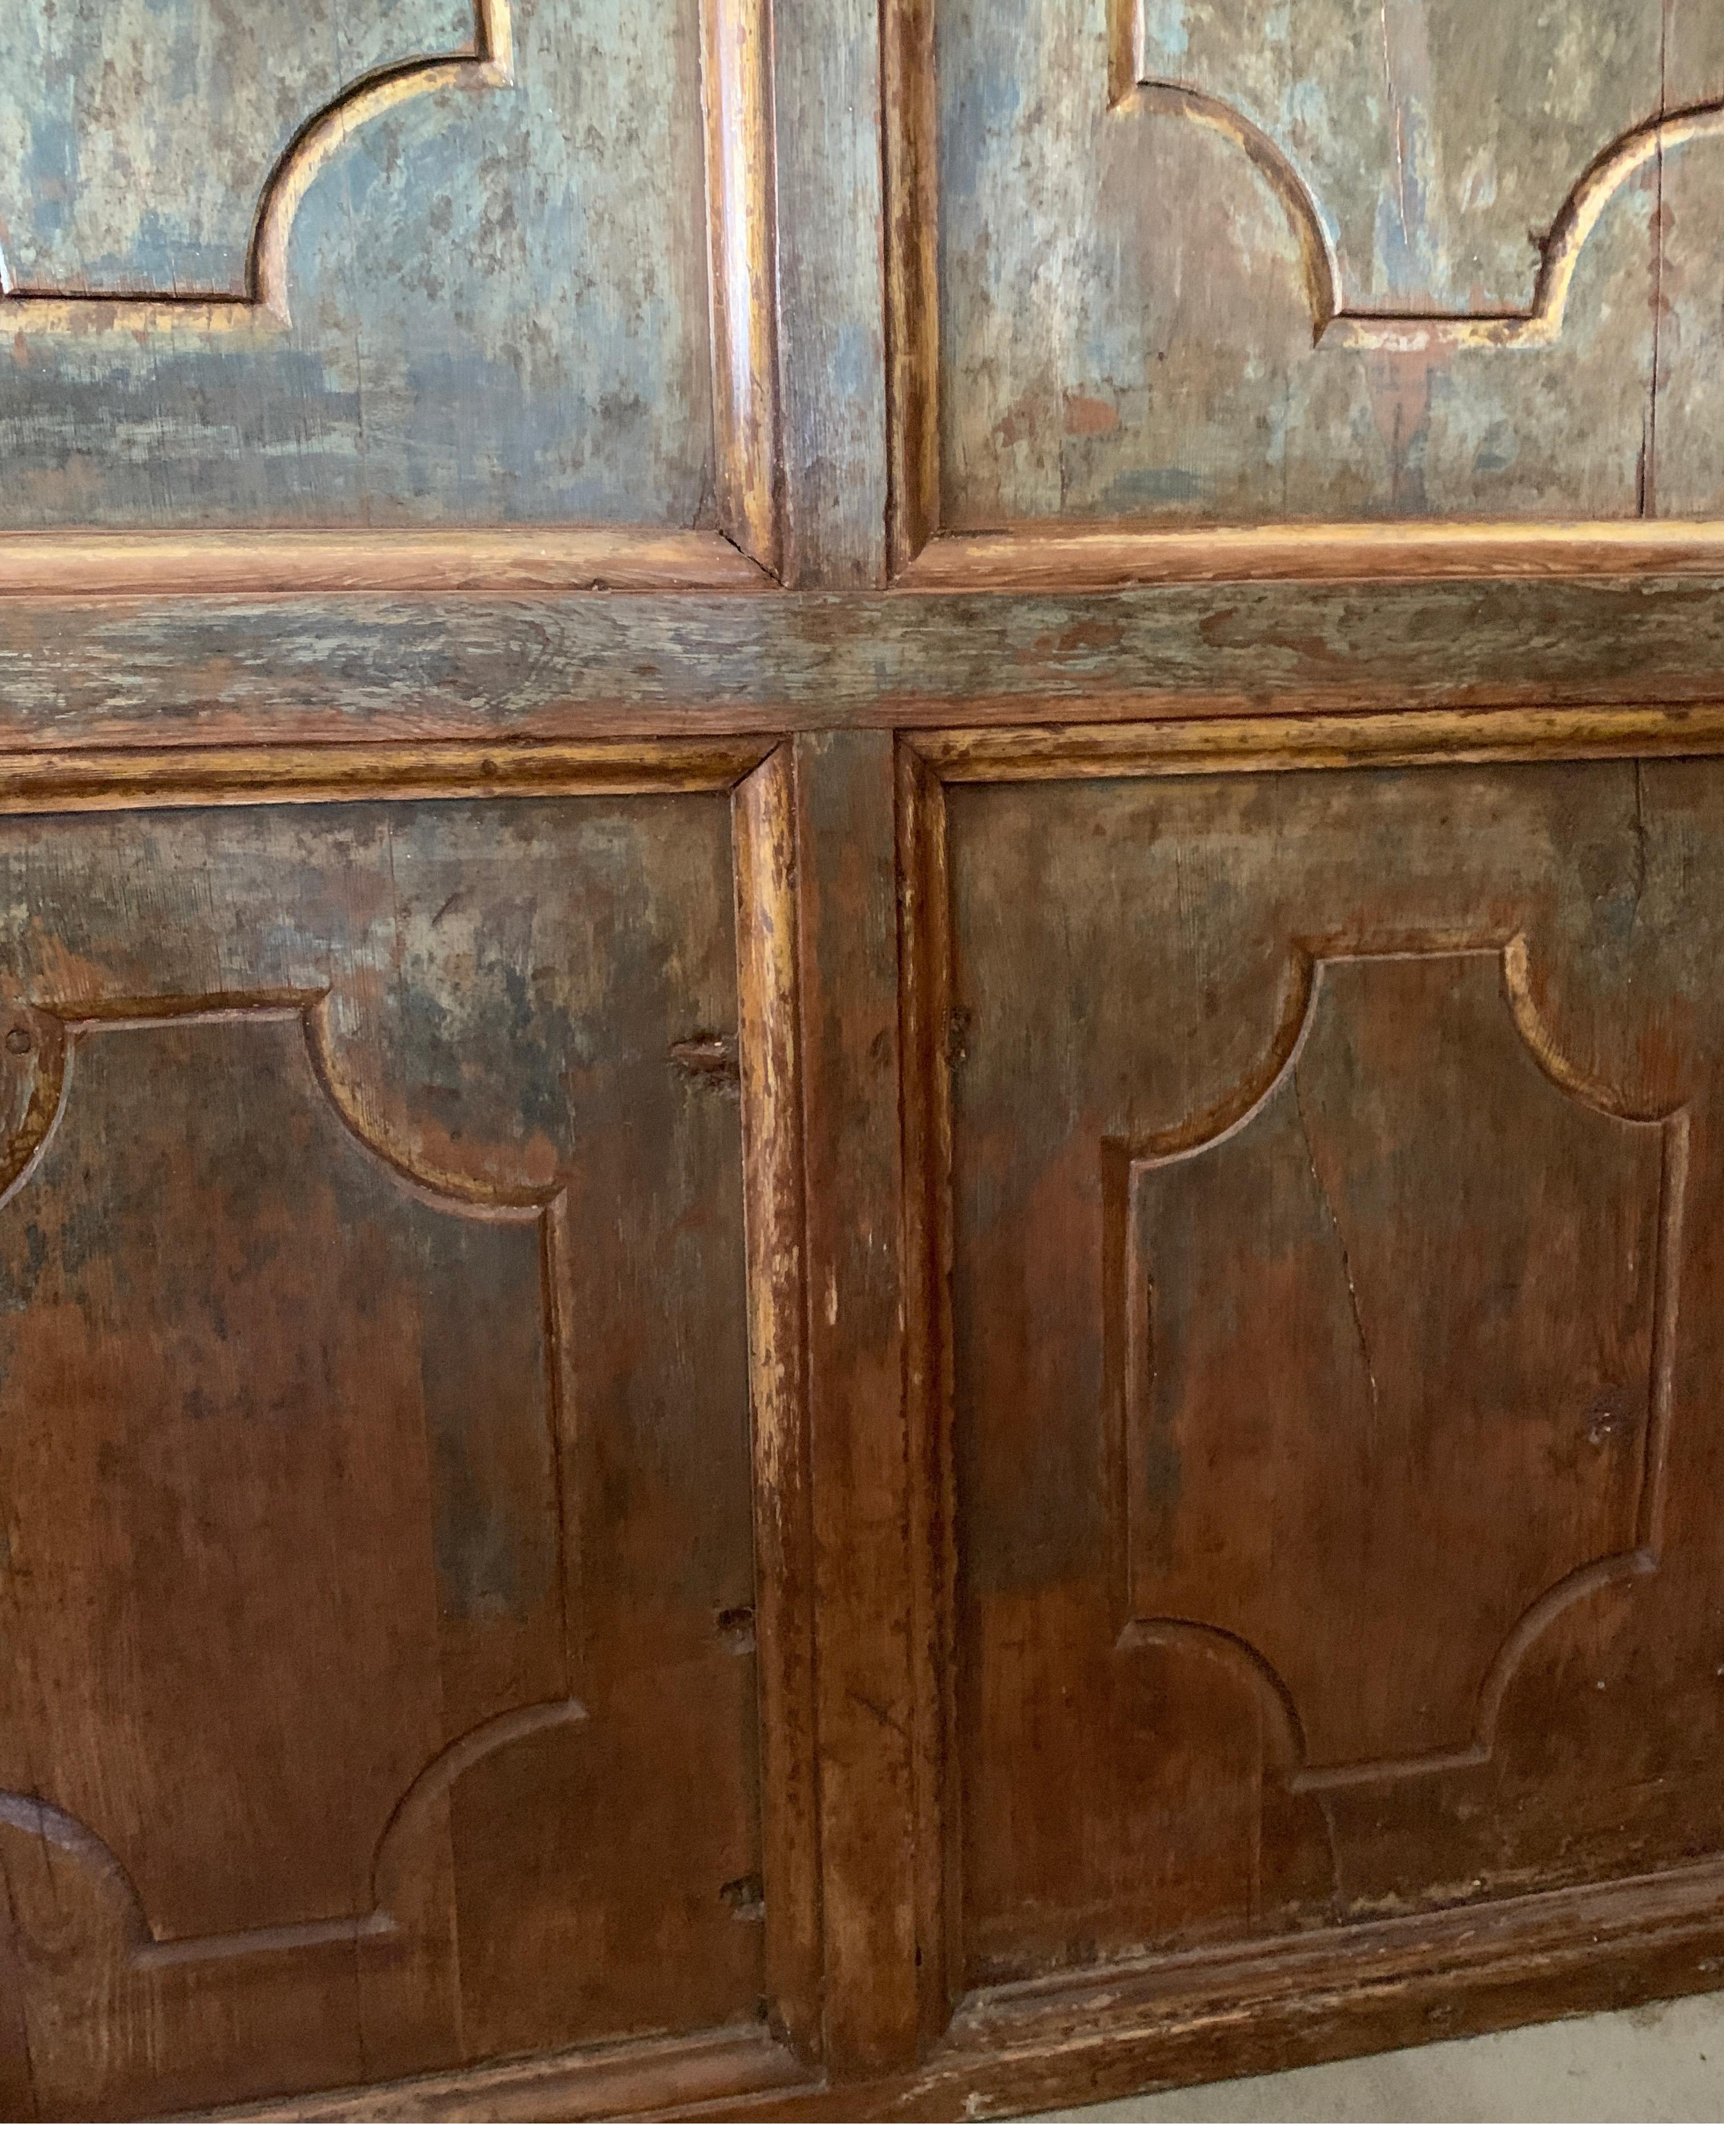 Early Spanish 18th Century Polychrome Door with Original Hardware and Paint In Fair Condition For Sale In Houston, TX